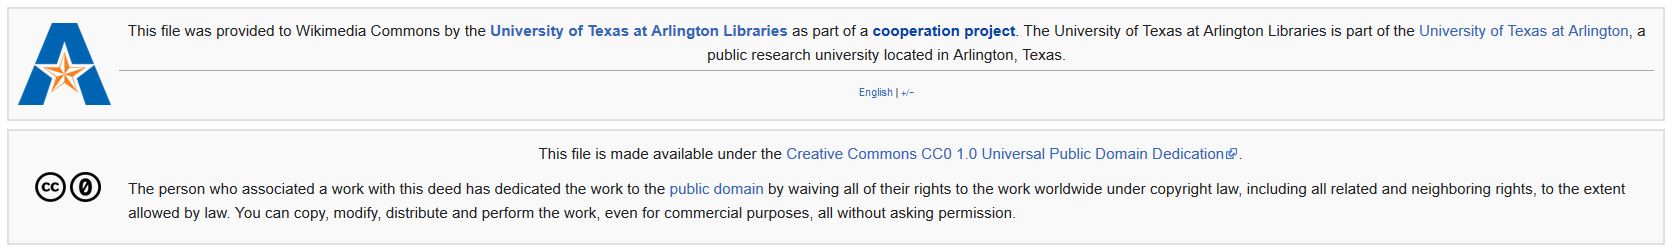 UTA Libraries cooperation header template and text of the Creative Commons CC0 1.0 public domain declaration on Wikimedia Commons.